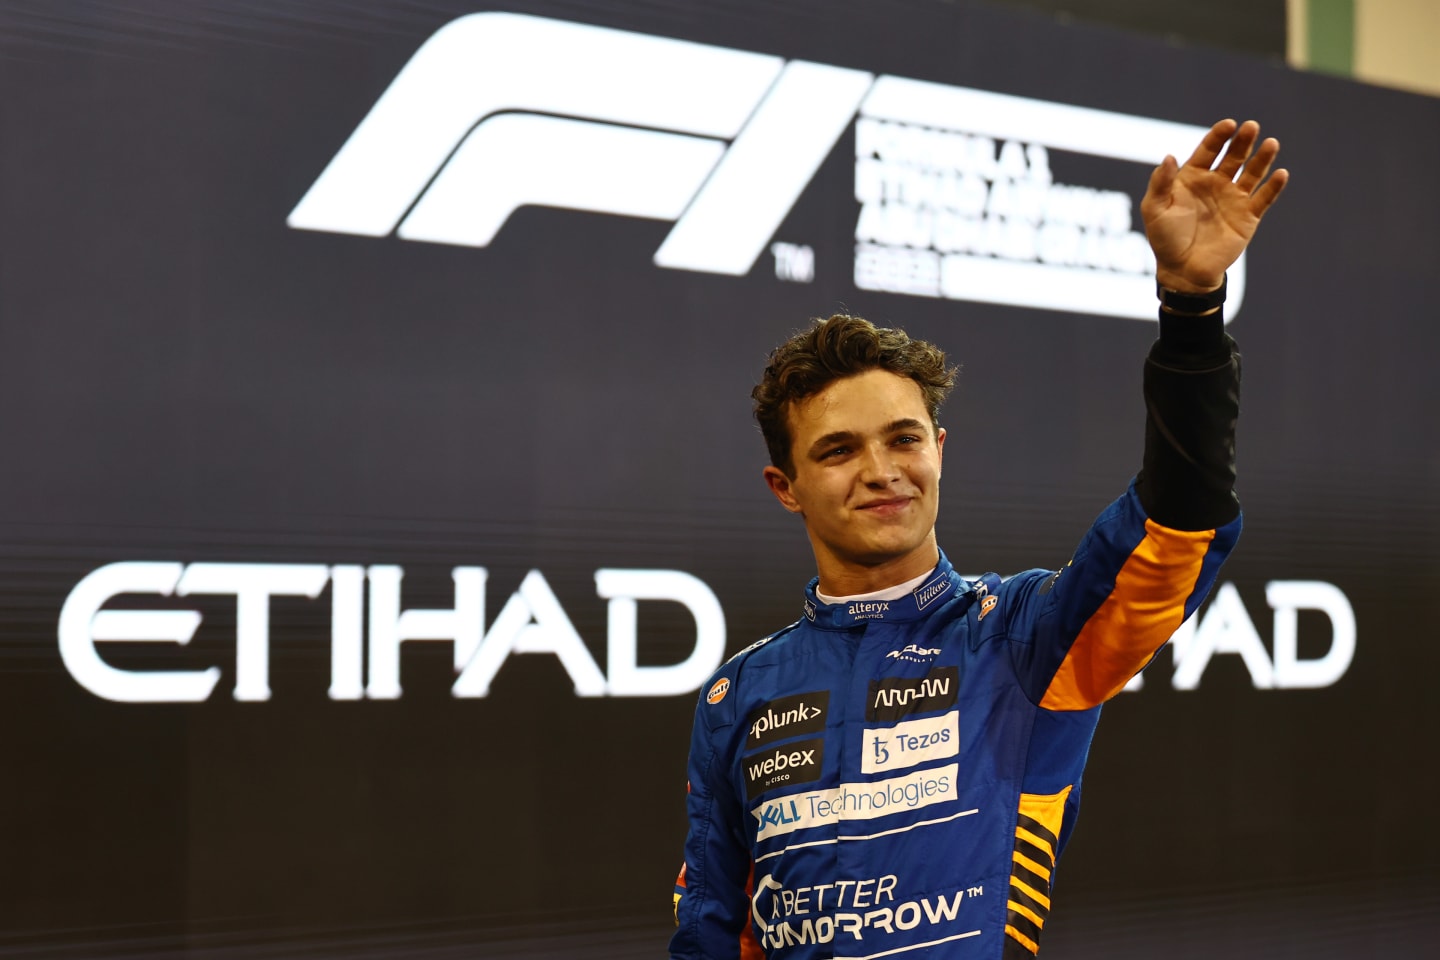 ABU DHABI, UNITED ARAB EMIRATES - DECEMBER 11: Third place qualifier Lando Norris of Great Britain and McLaren F1 celebrates in parc ferme during qualifying ahead of the F1 Grand Prix of Abu Dhabi at Yas Marina Circuit on December 11, 2021 in Abu Dhabi, United Arab Emirates. (Photo by Mark Thompson/Getty Images)